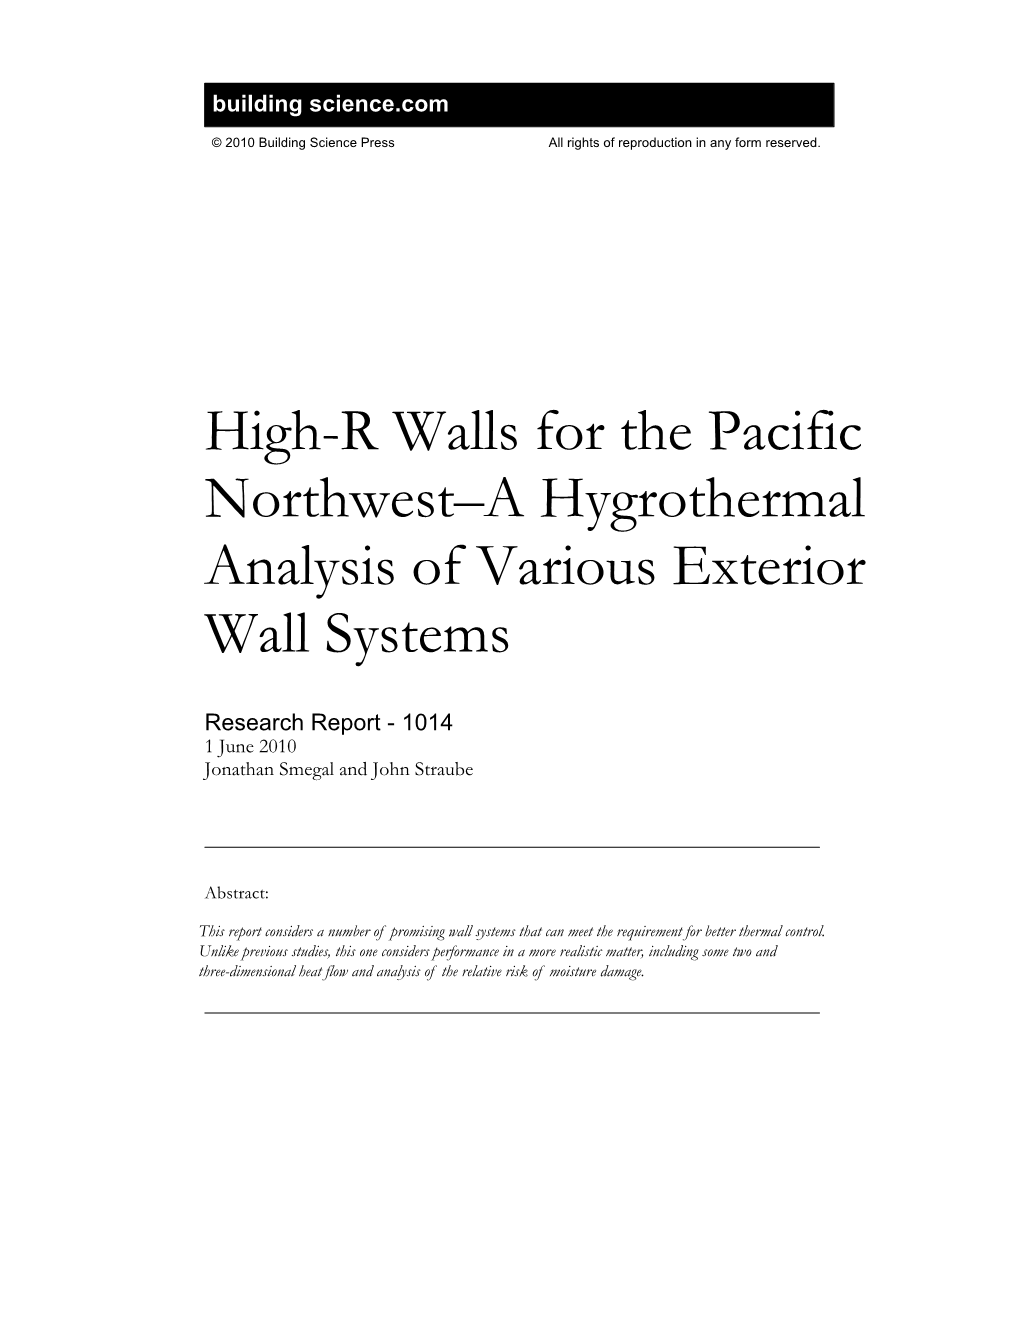 High-R Walls for the Pacific Northwest–A Hygrothermal Analysis of Various Exterior Wall Systems